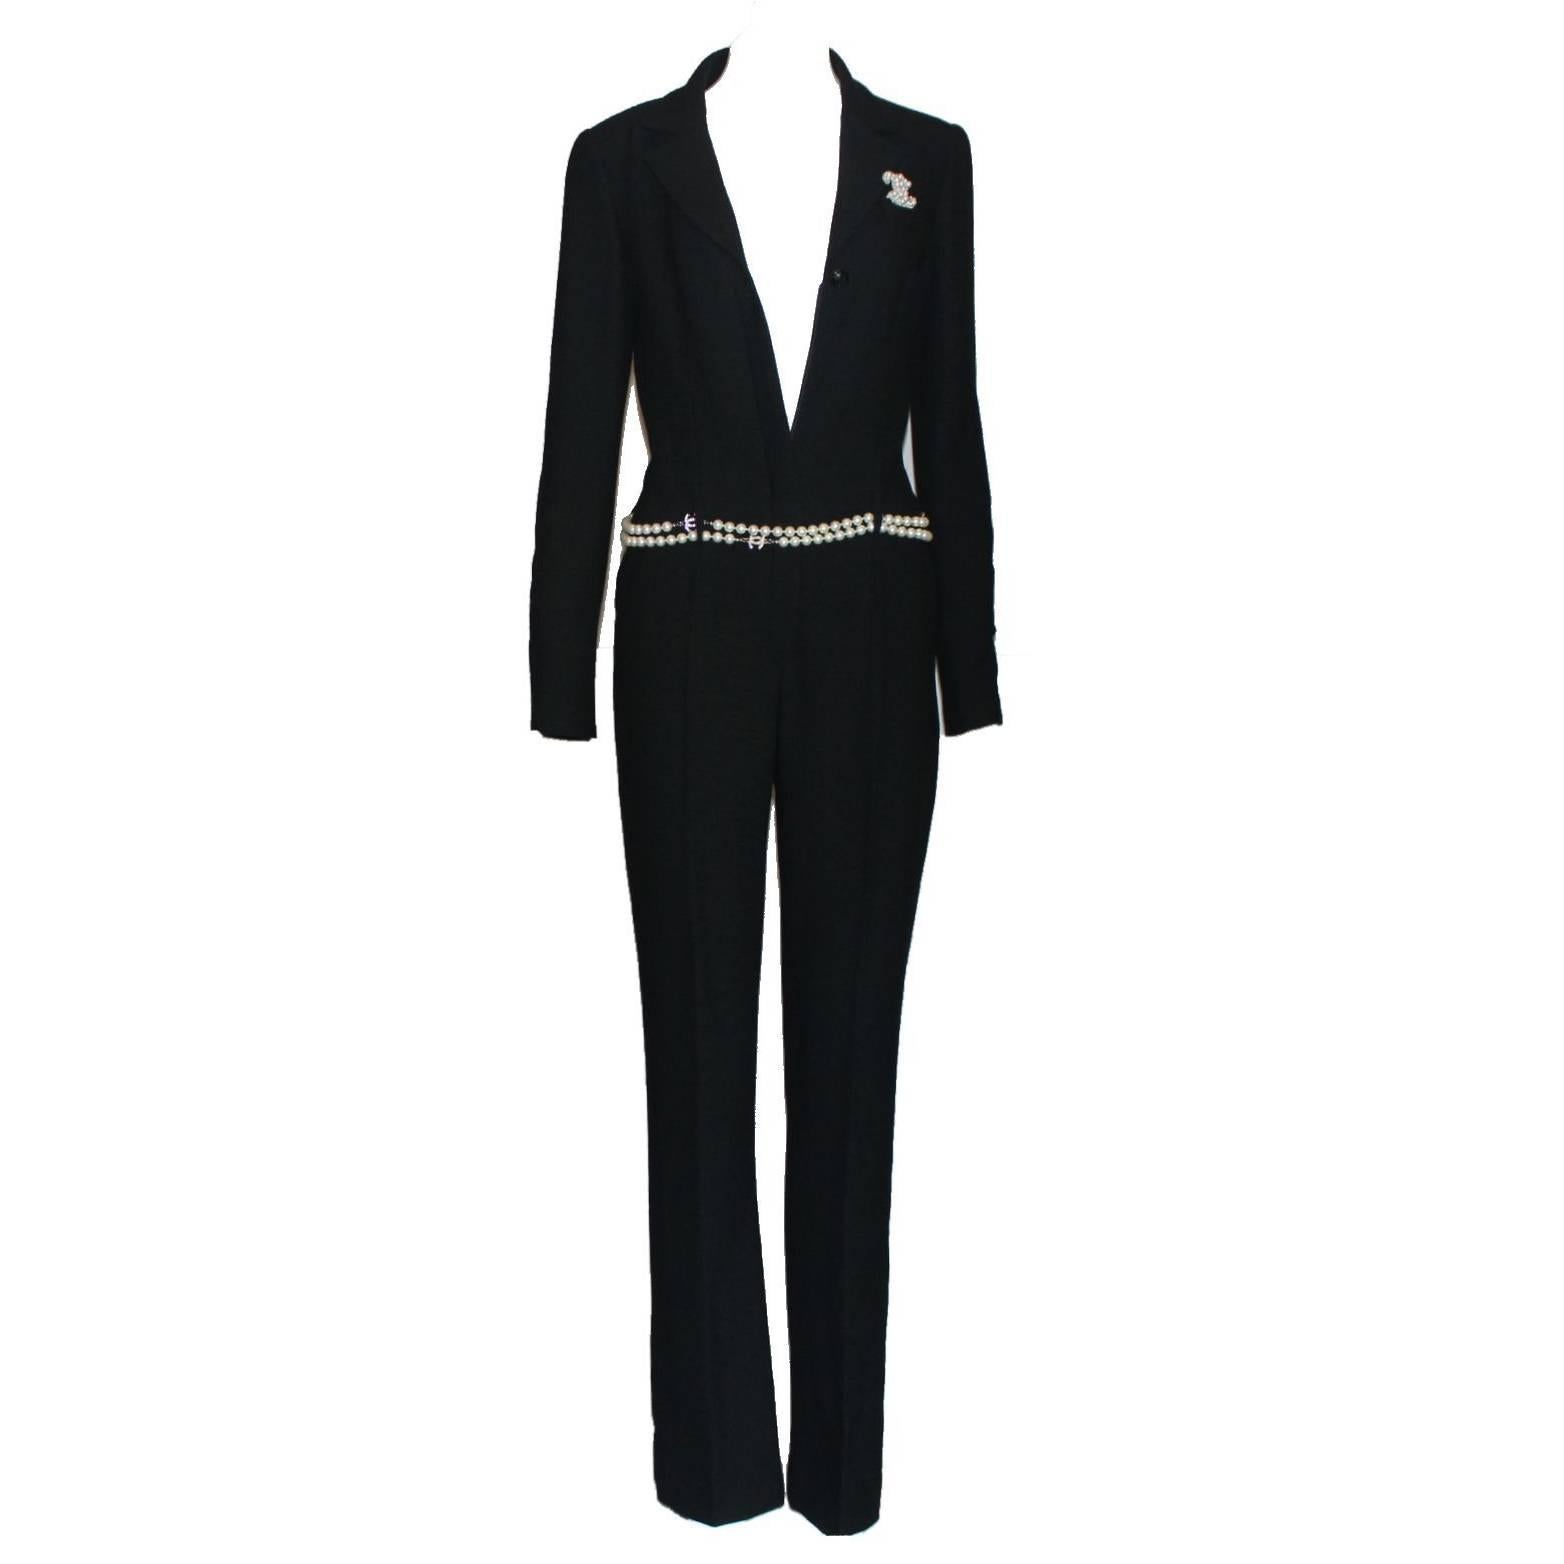 Chanel Black Boucle Overall Jumpsuit with Zipper